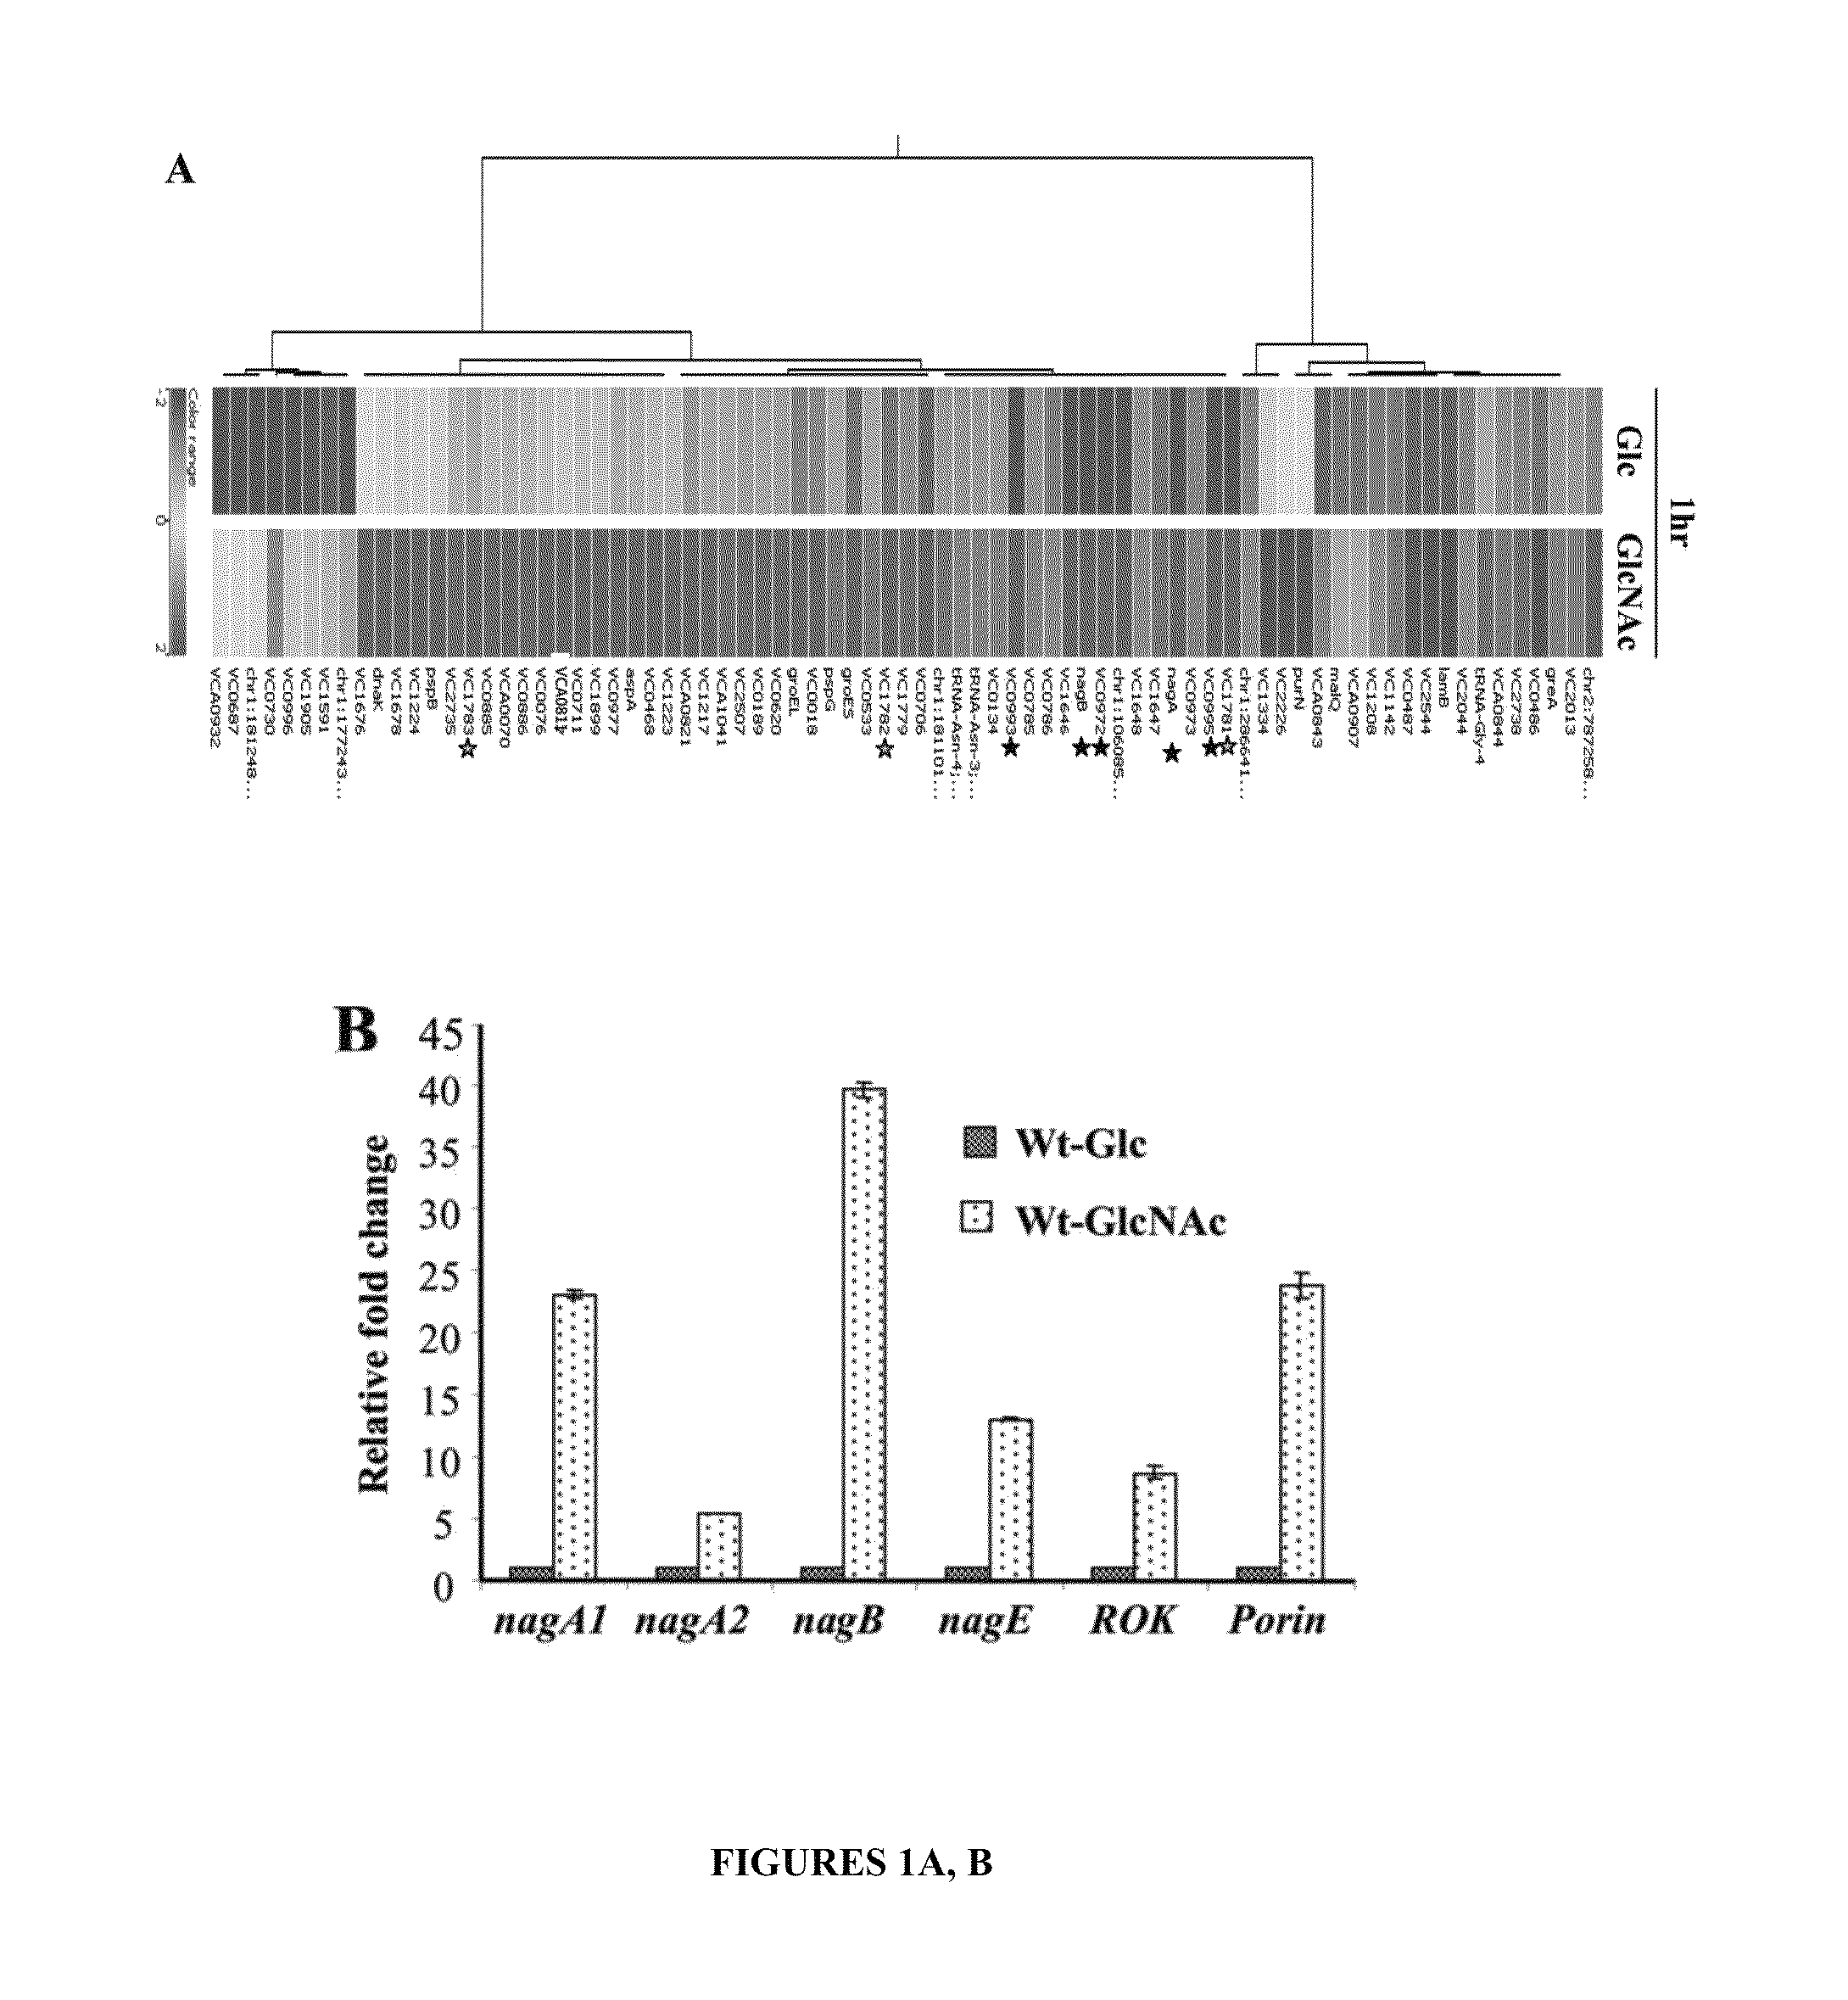 Recombinant microorganisms and uses thereof